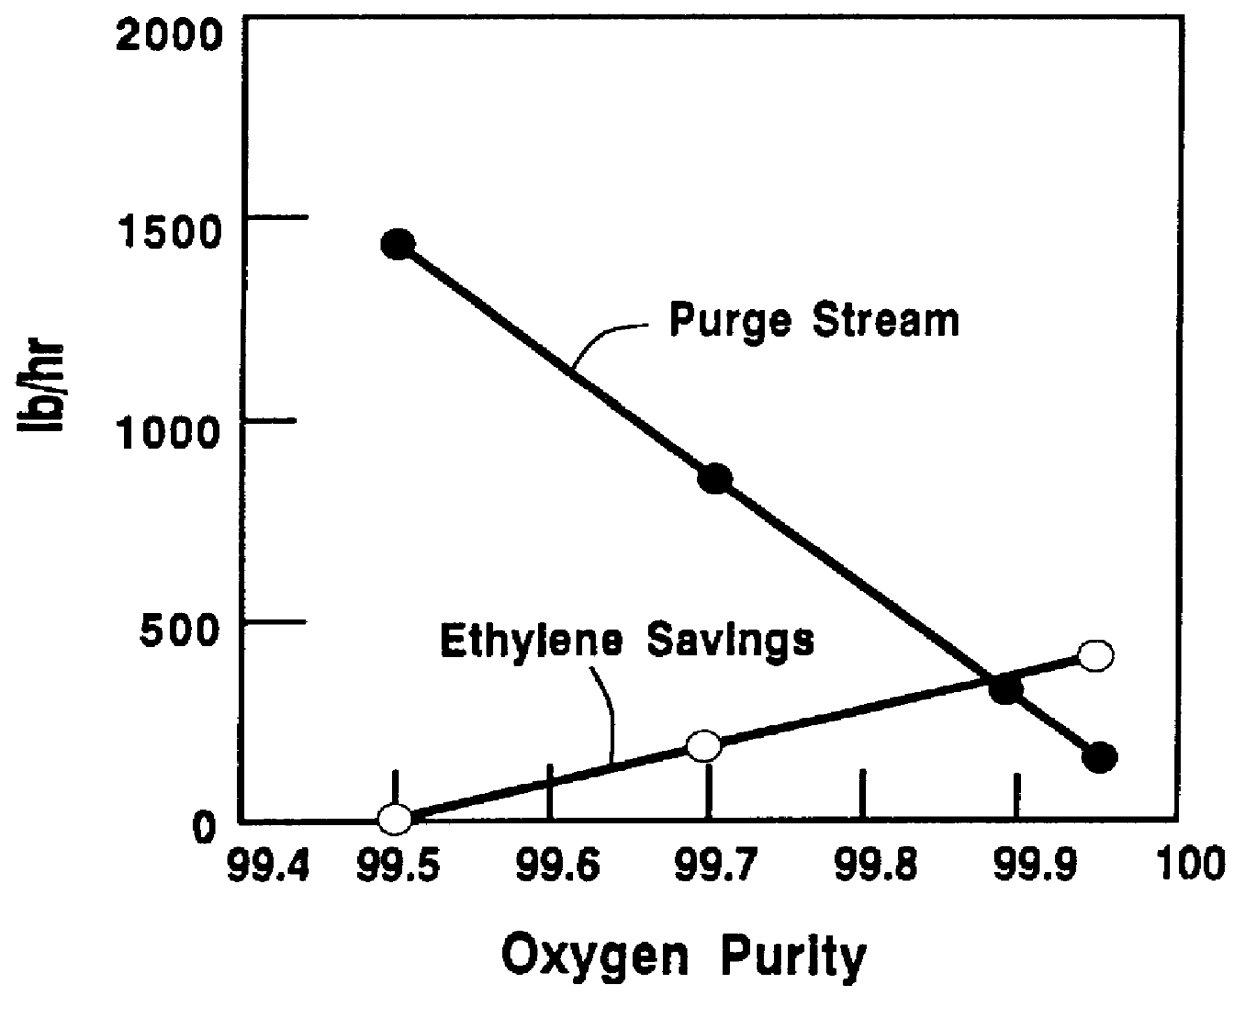 High purity oxygen for ethylene oxide production